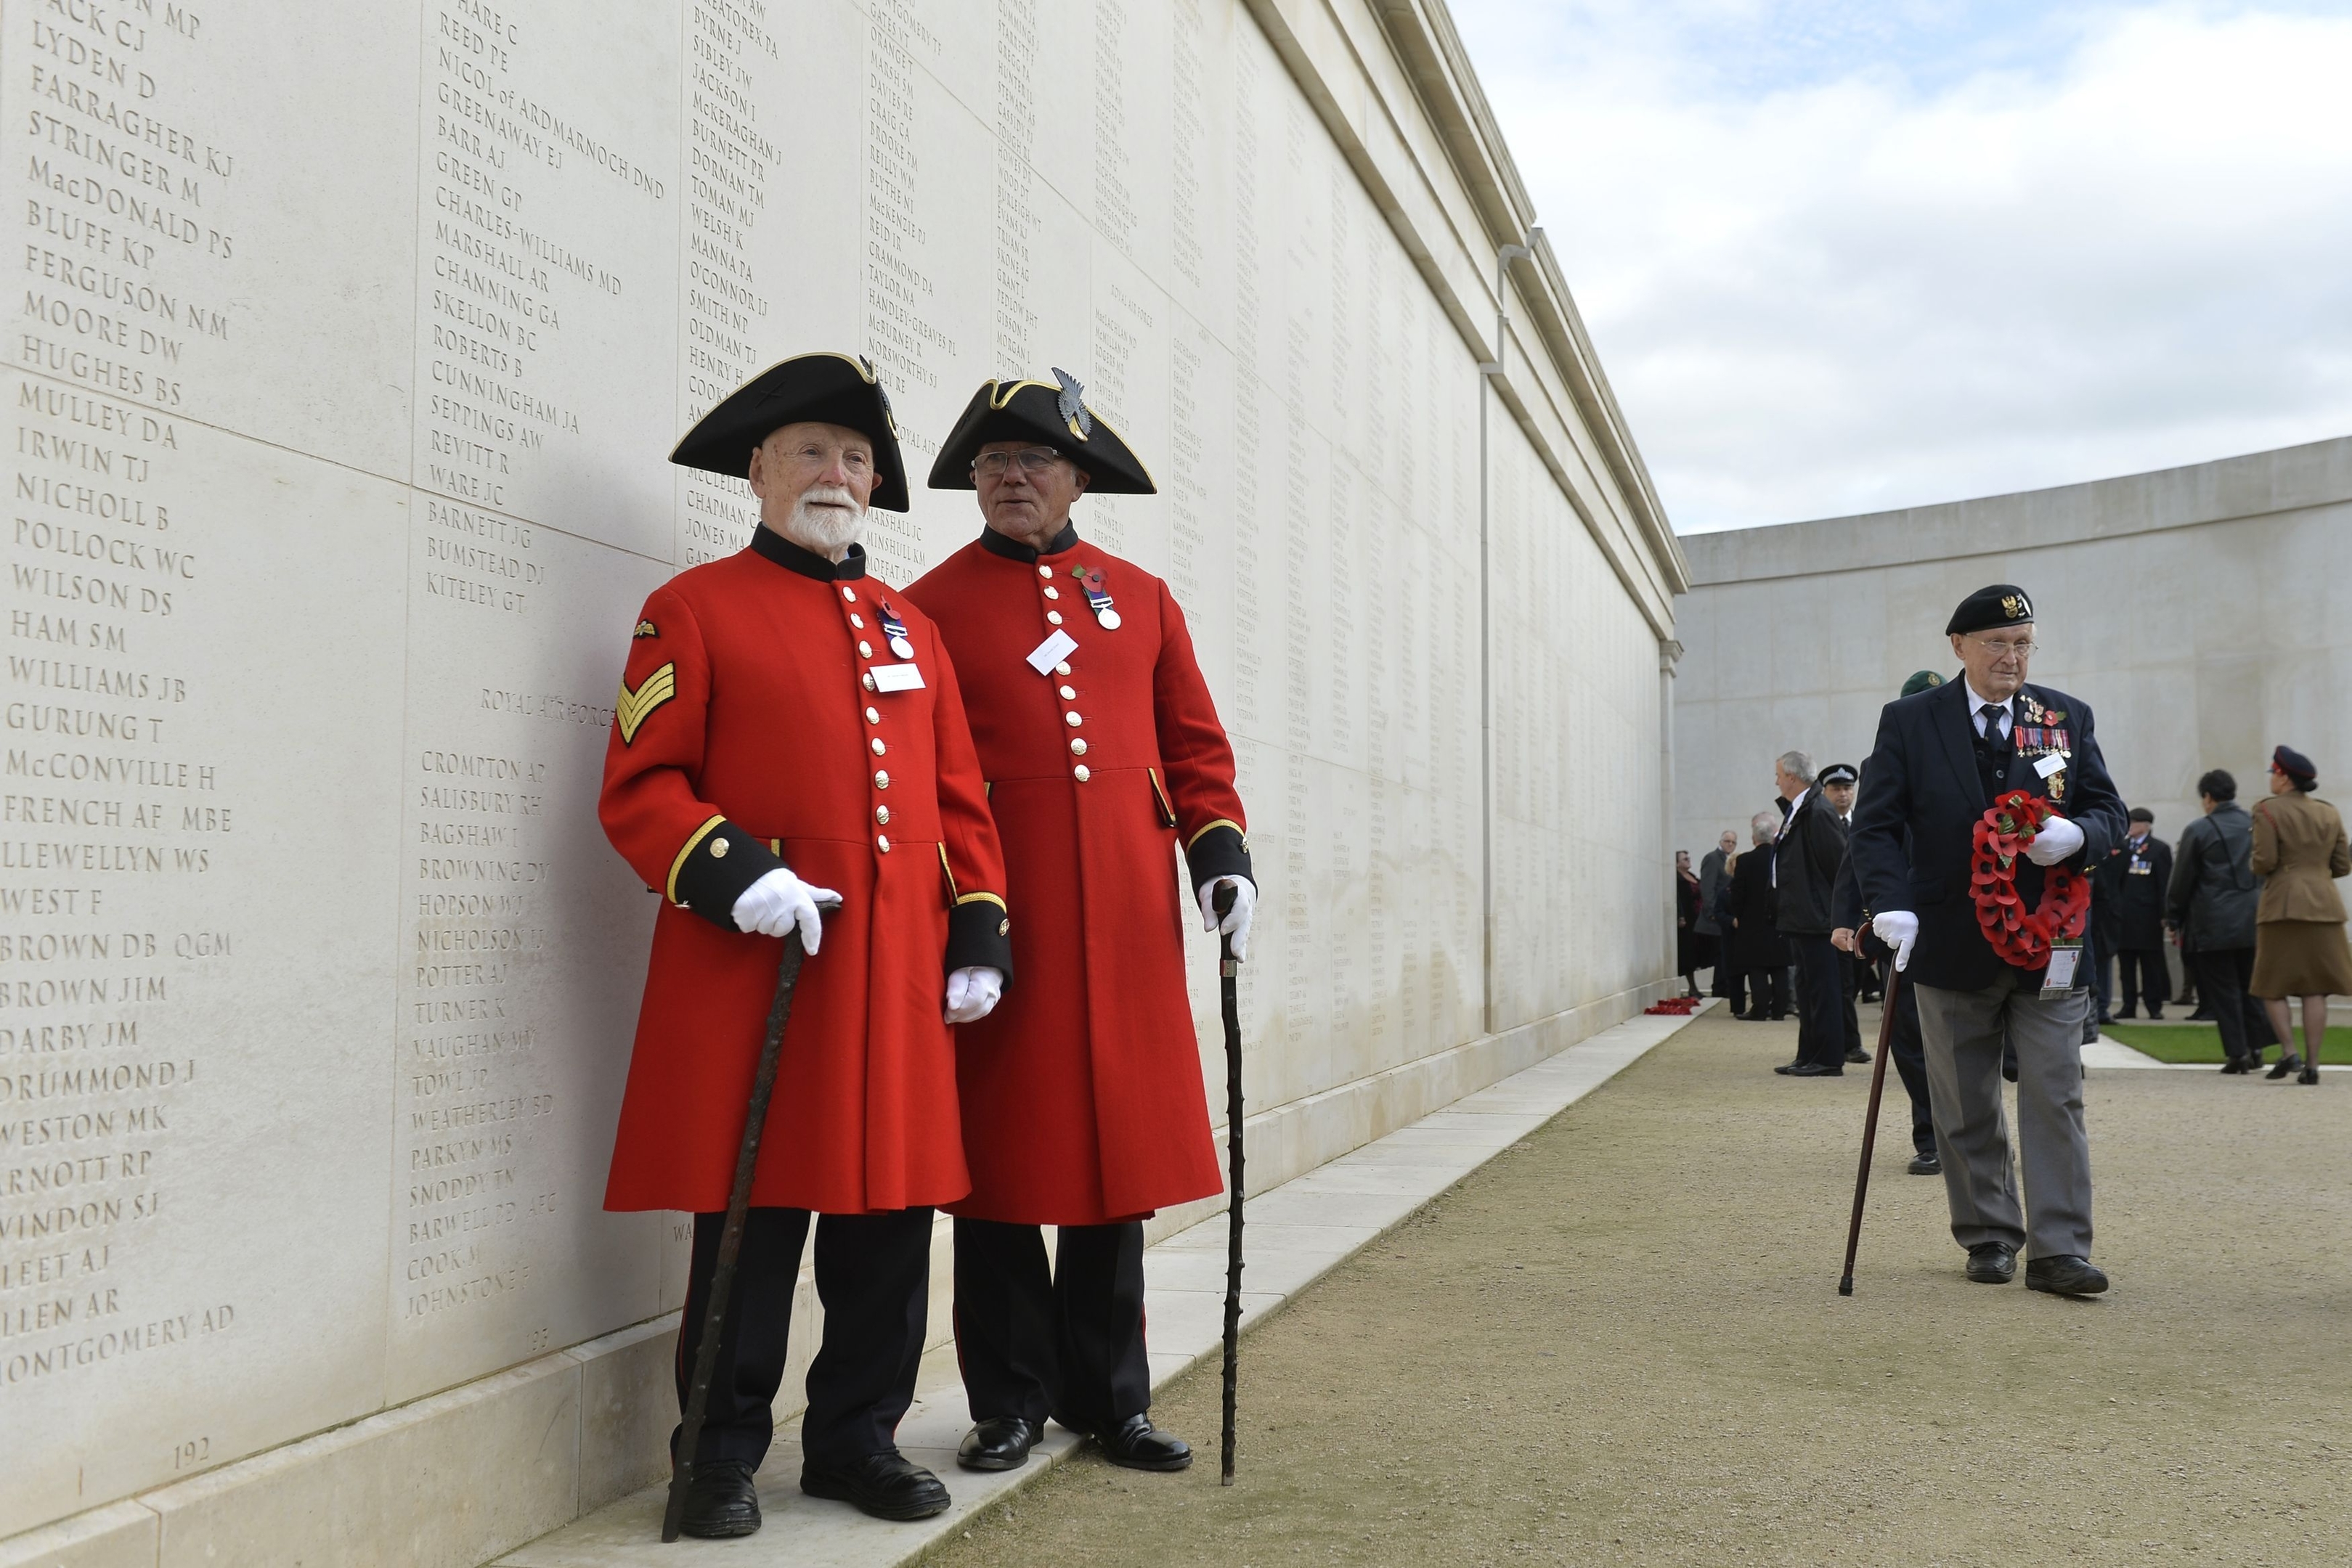 Chelsea Pensioners James Fellows (left) and David Grant (right) following a service at the National Memorial Arboretum in Alrewas, Staffordshire to mark Armistice Day, 